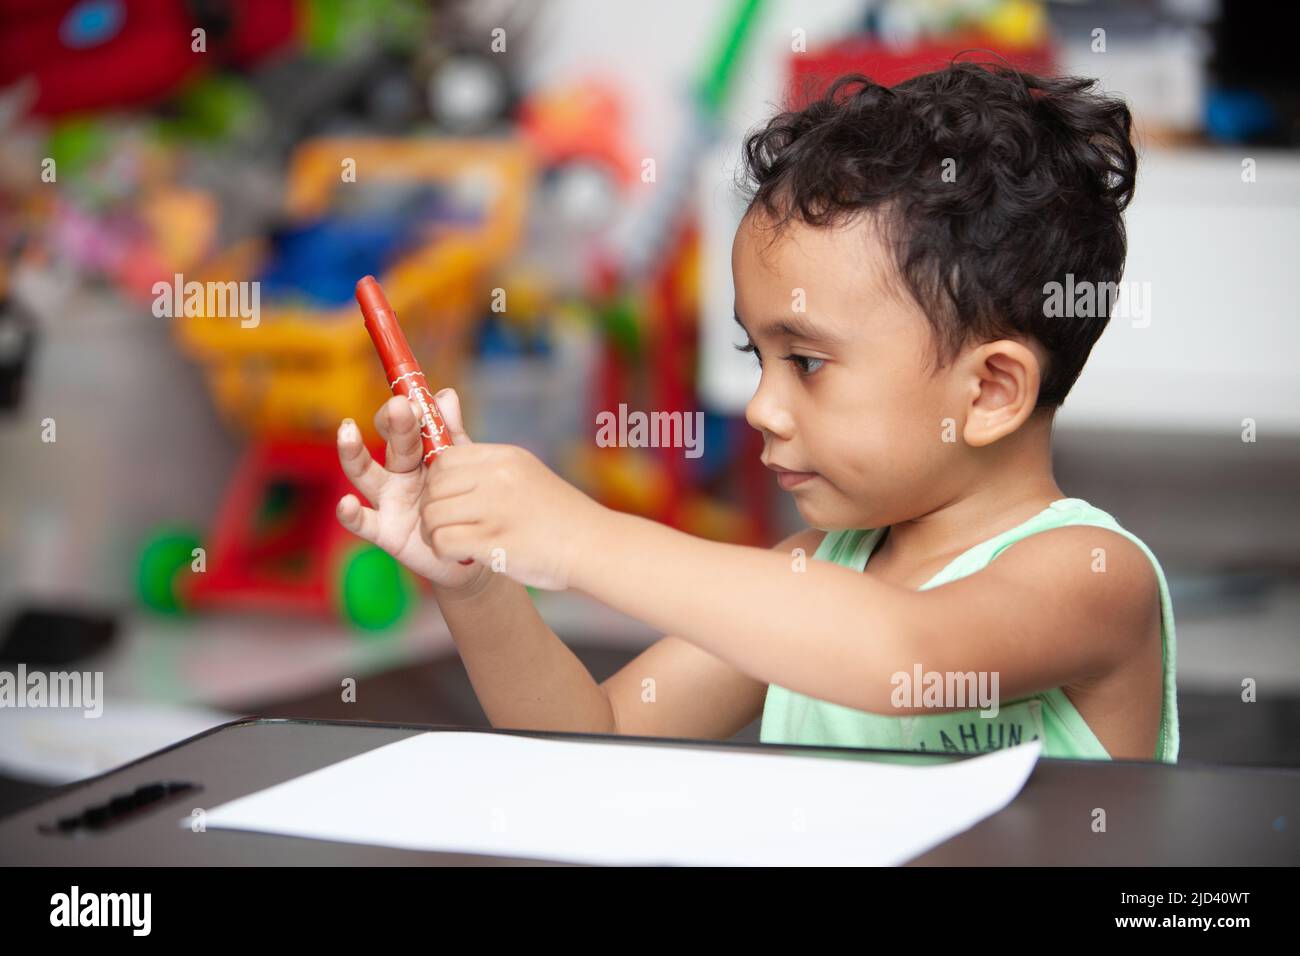 An Indonesian young boy in a light green t-shirt holding a red crayon to color a white sheet of paper on a black table in the living room Stock Photo